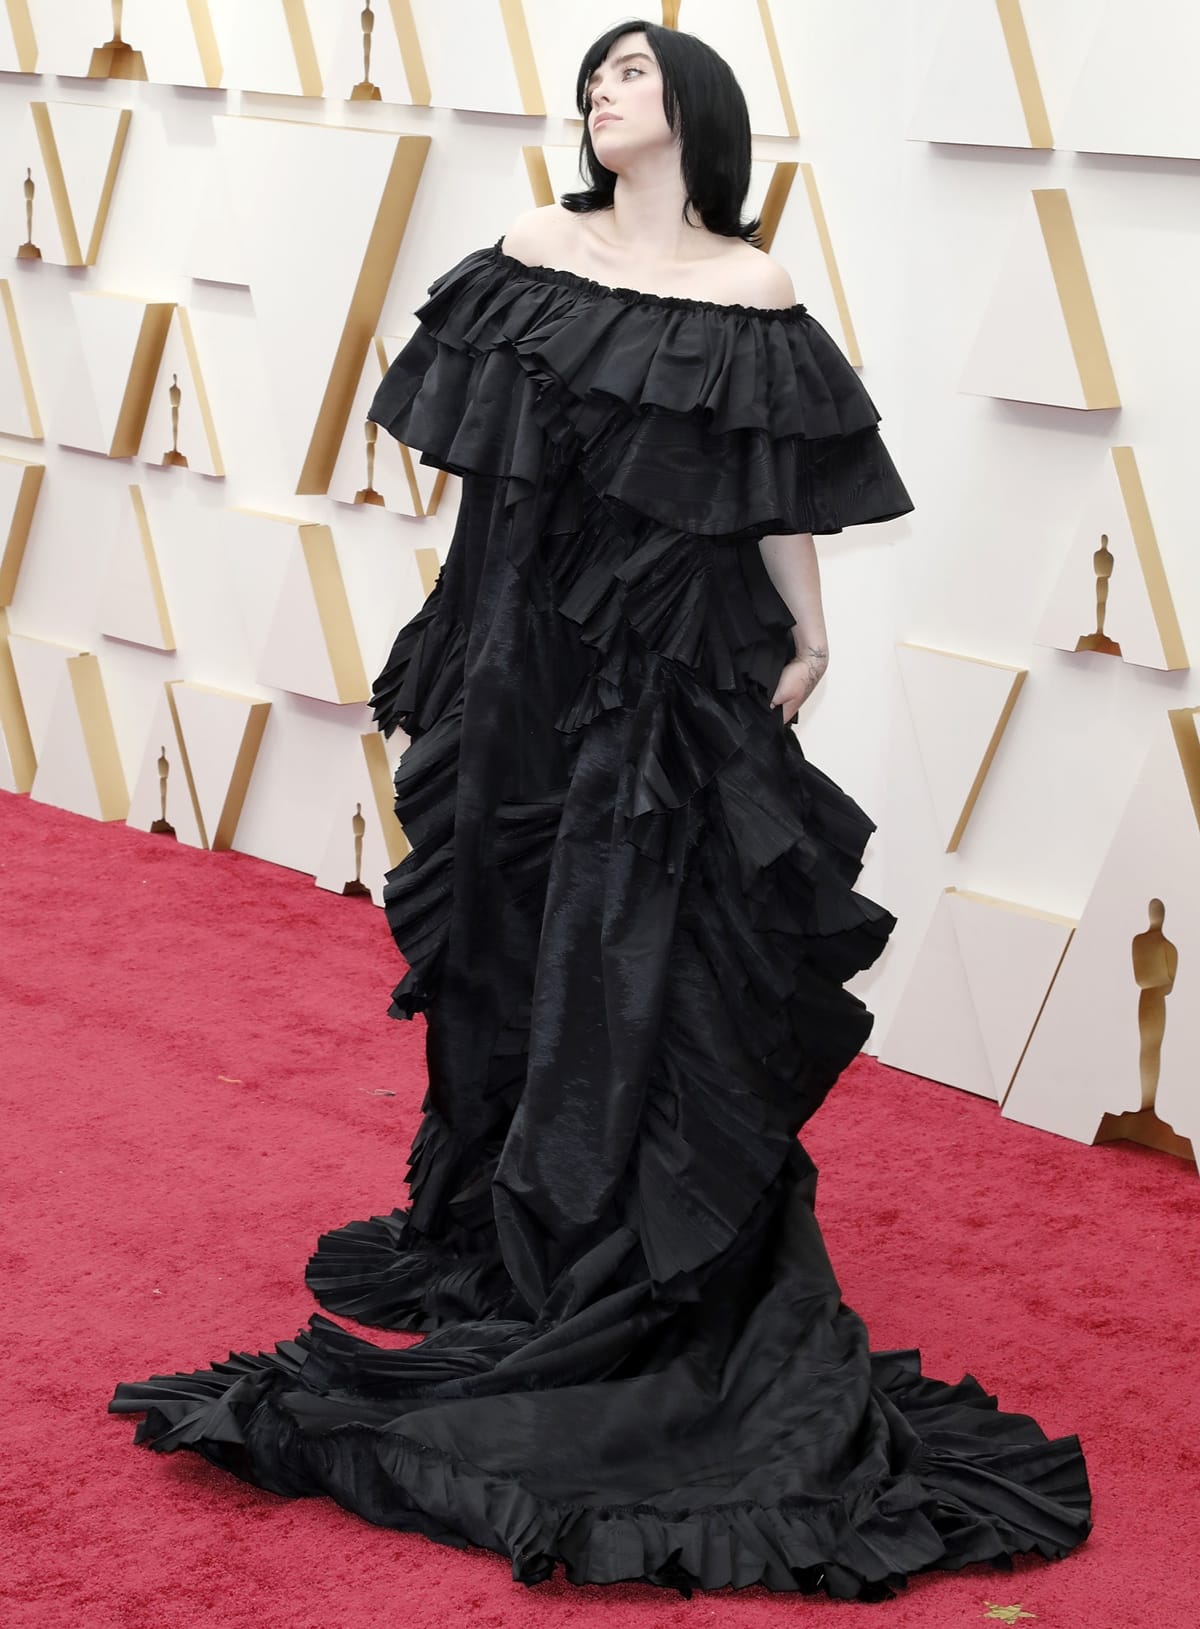 Billie Eilish wore a custom black off-the-shoulder Gucci gown featuring dramatic ruffles and a long train